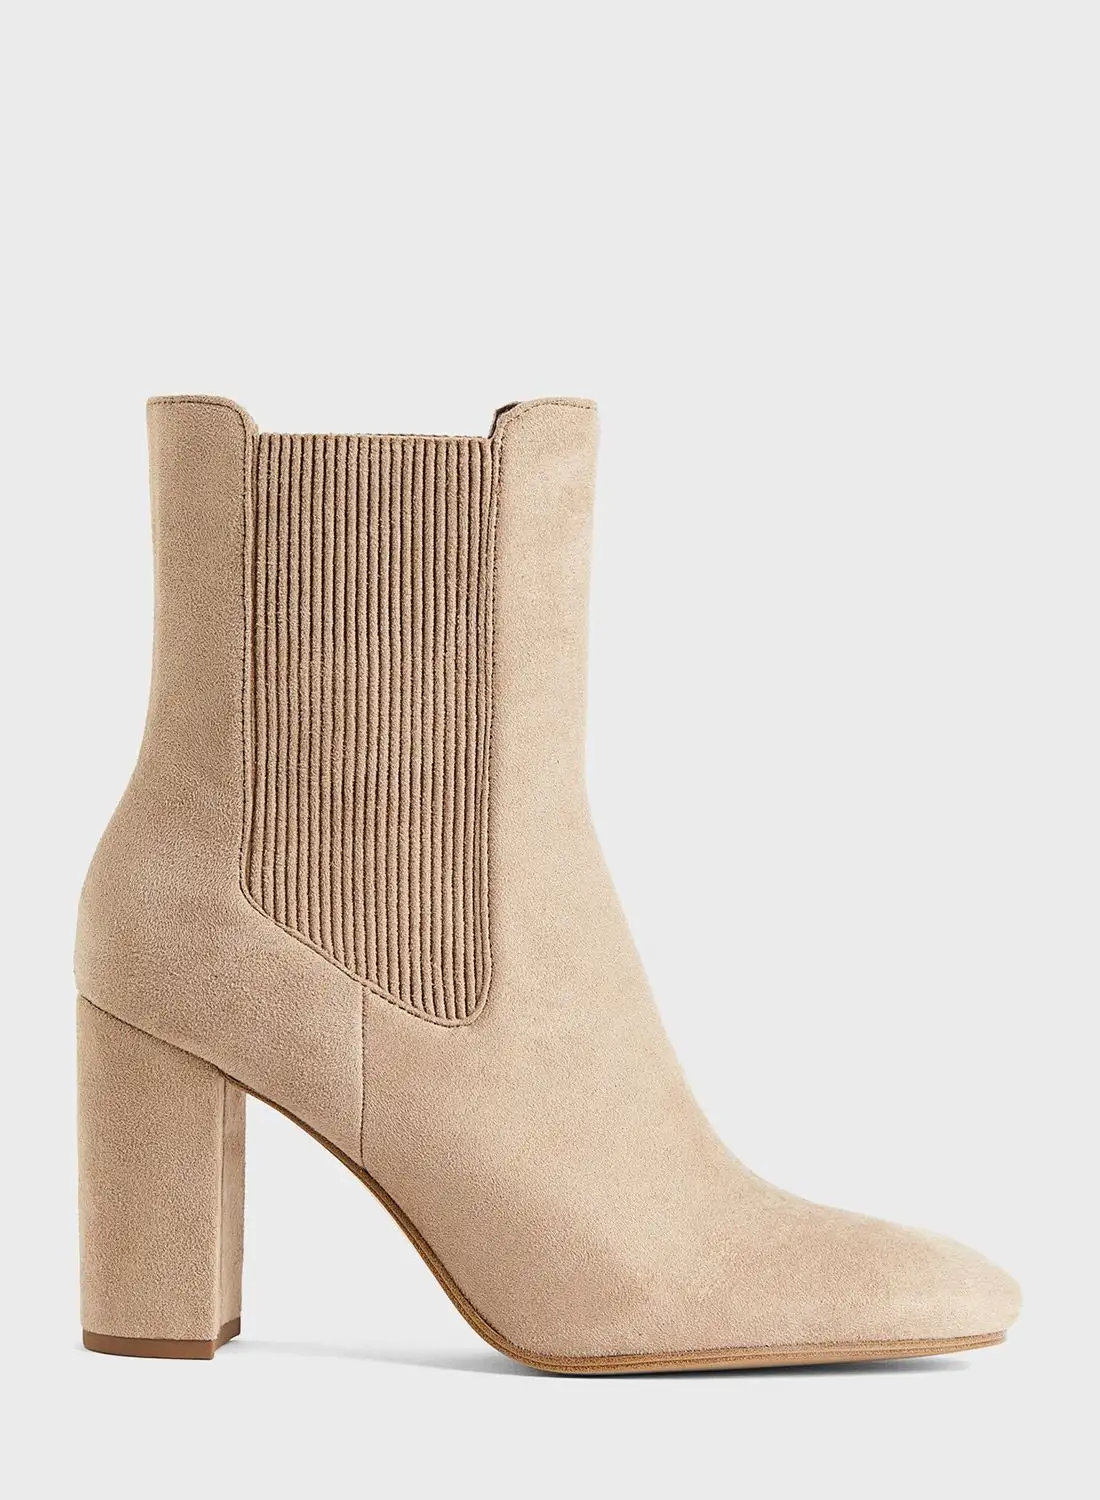 H&M Heeled Chelsea Boots